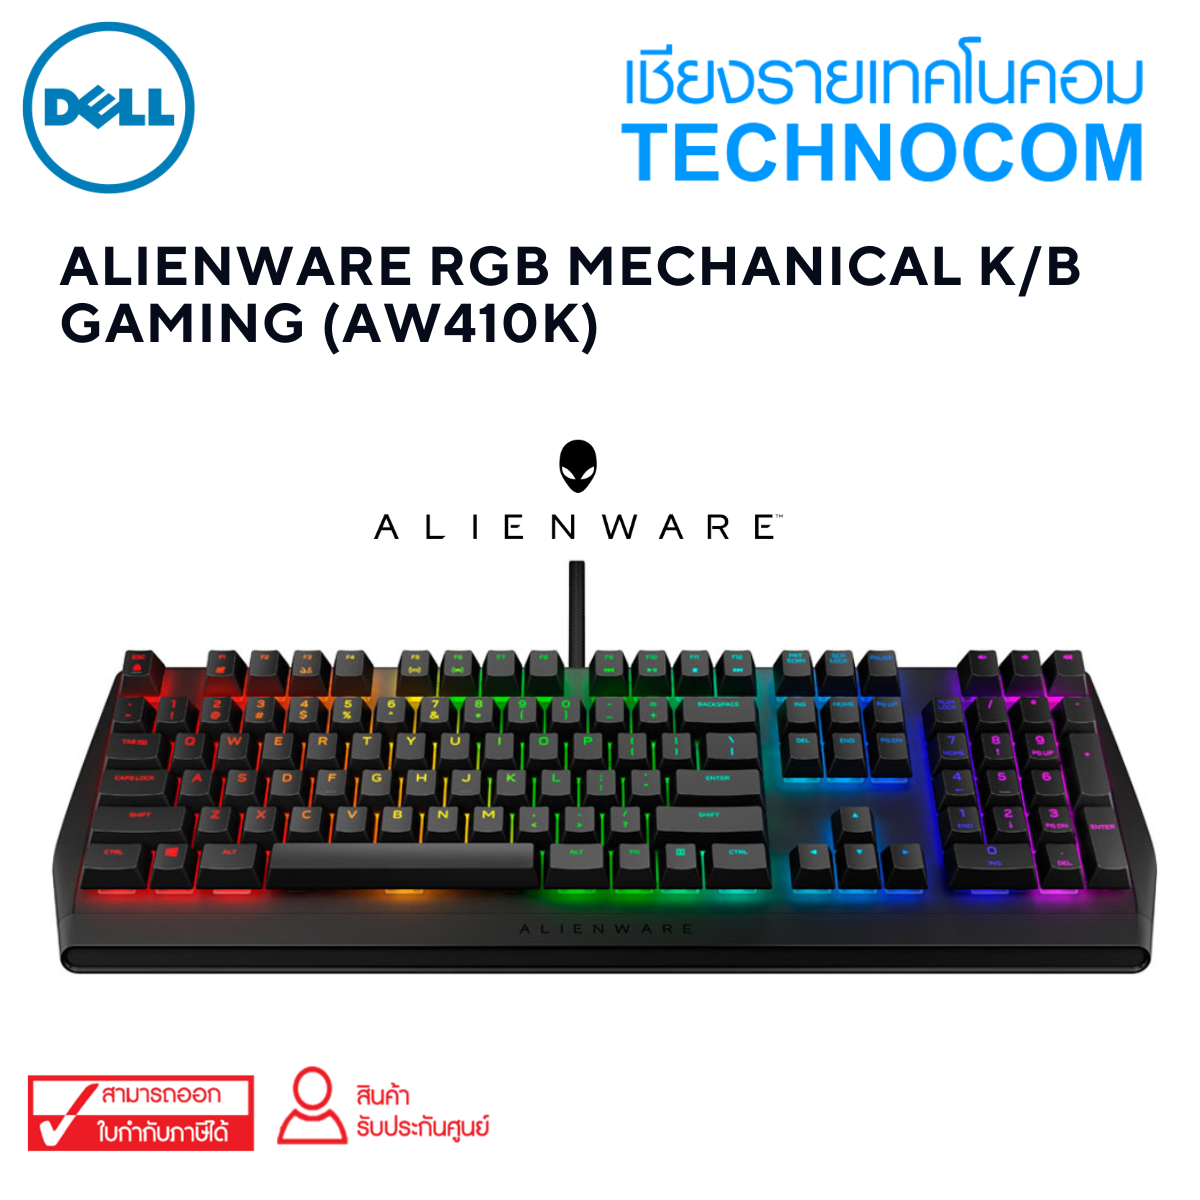 DELL ALIENWARE RGB MECHANICAL K/B GAMING (AW410K)